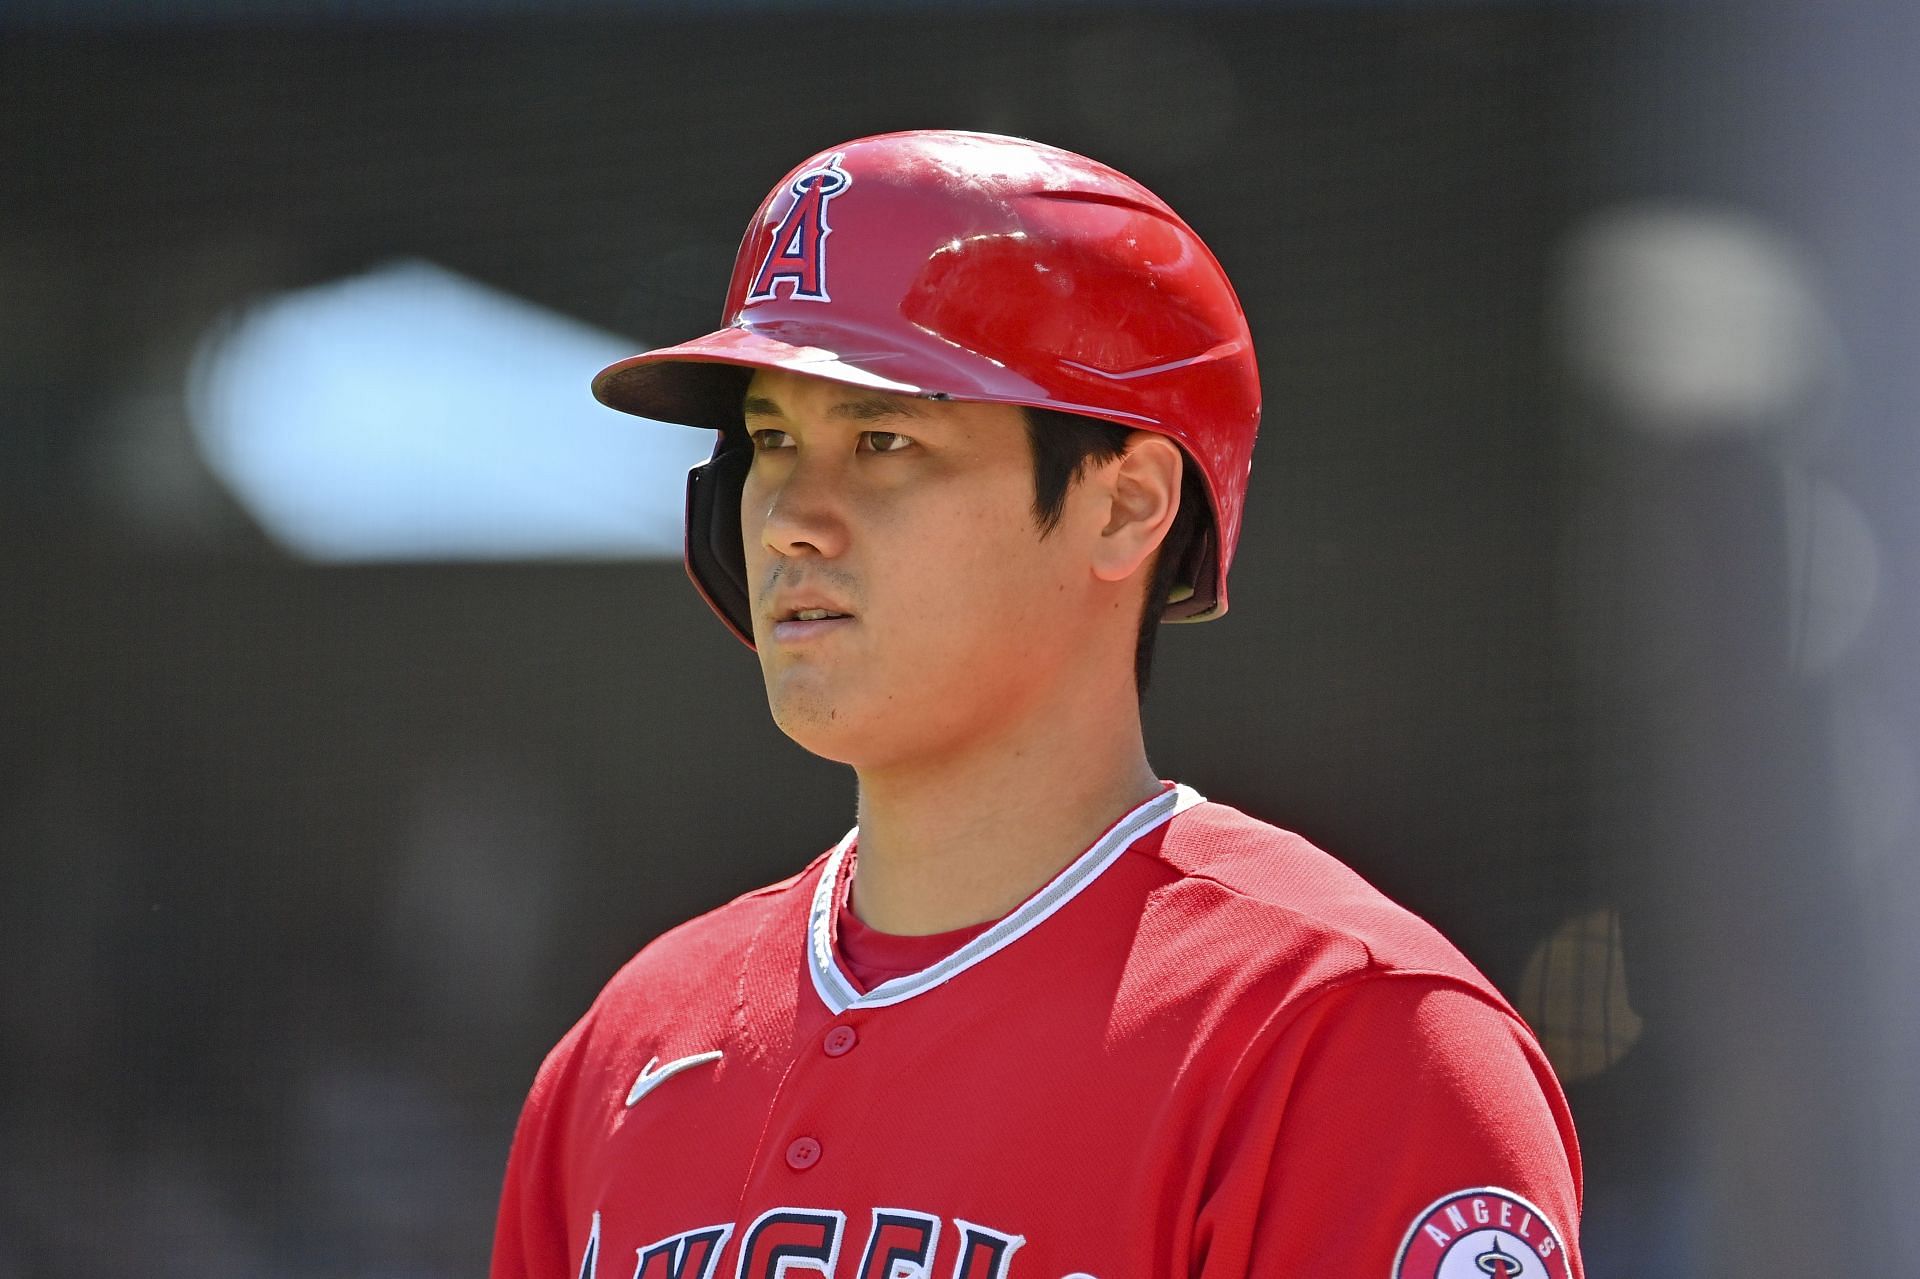 Shohei Ohtani needs to be a free agent target for Braves, sportswriter says